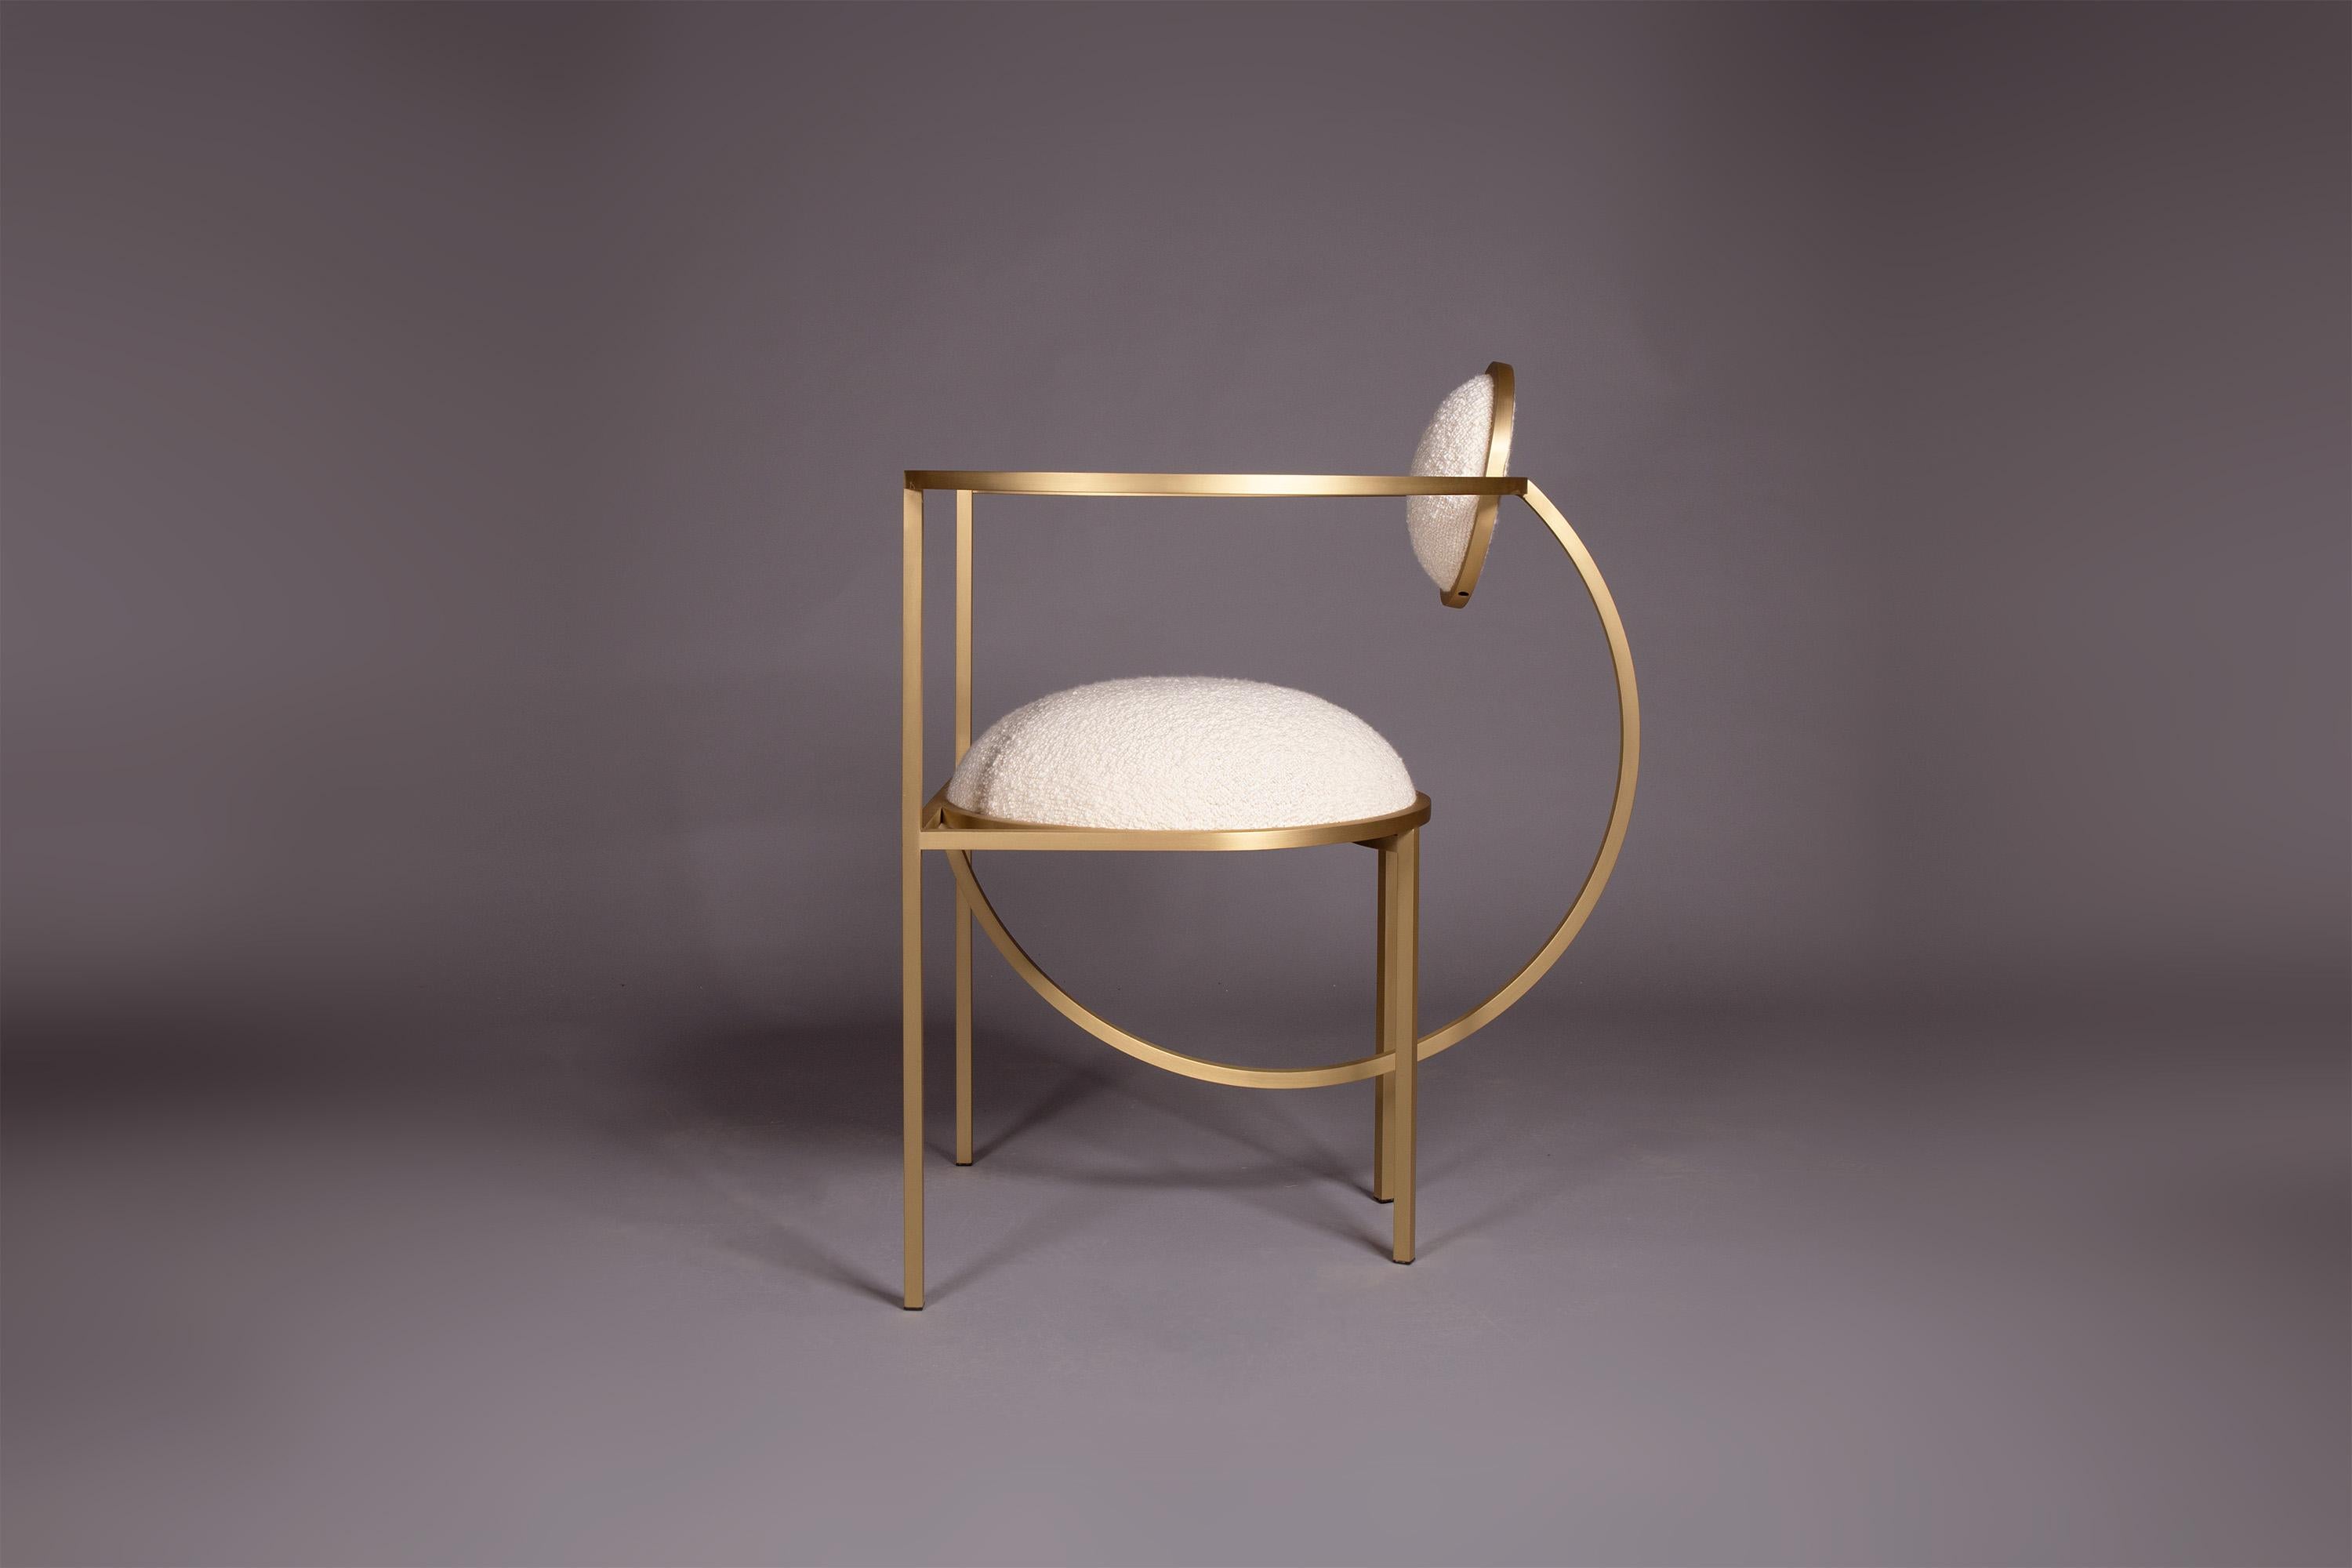 Modern Lunar Chair in Cream Boucle Wool Fabric and Brushed Brass, by Lara Bohinc For Sale